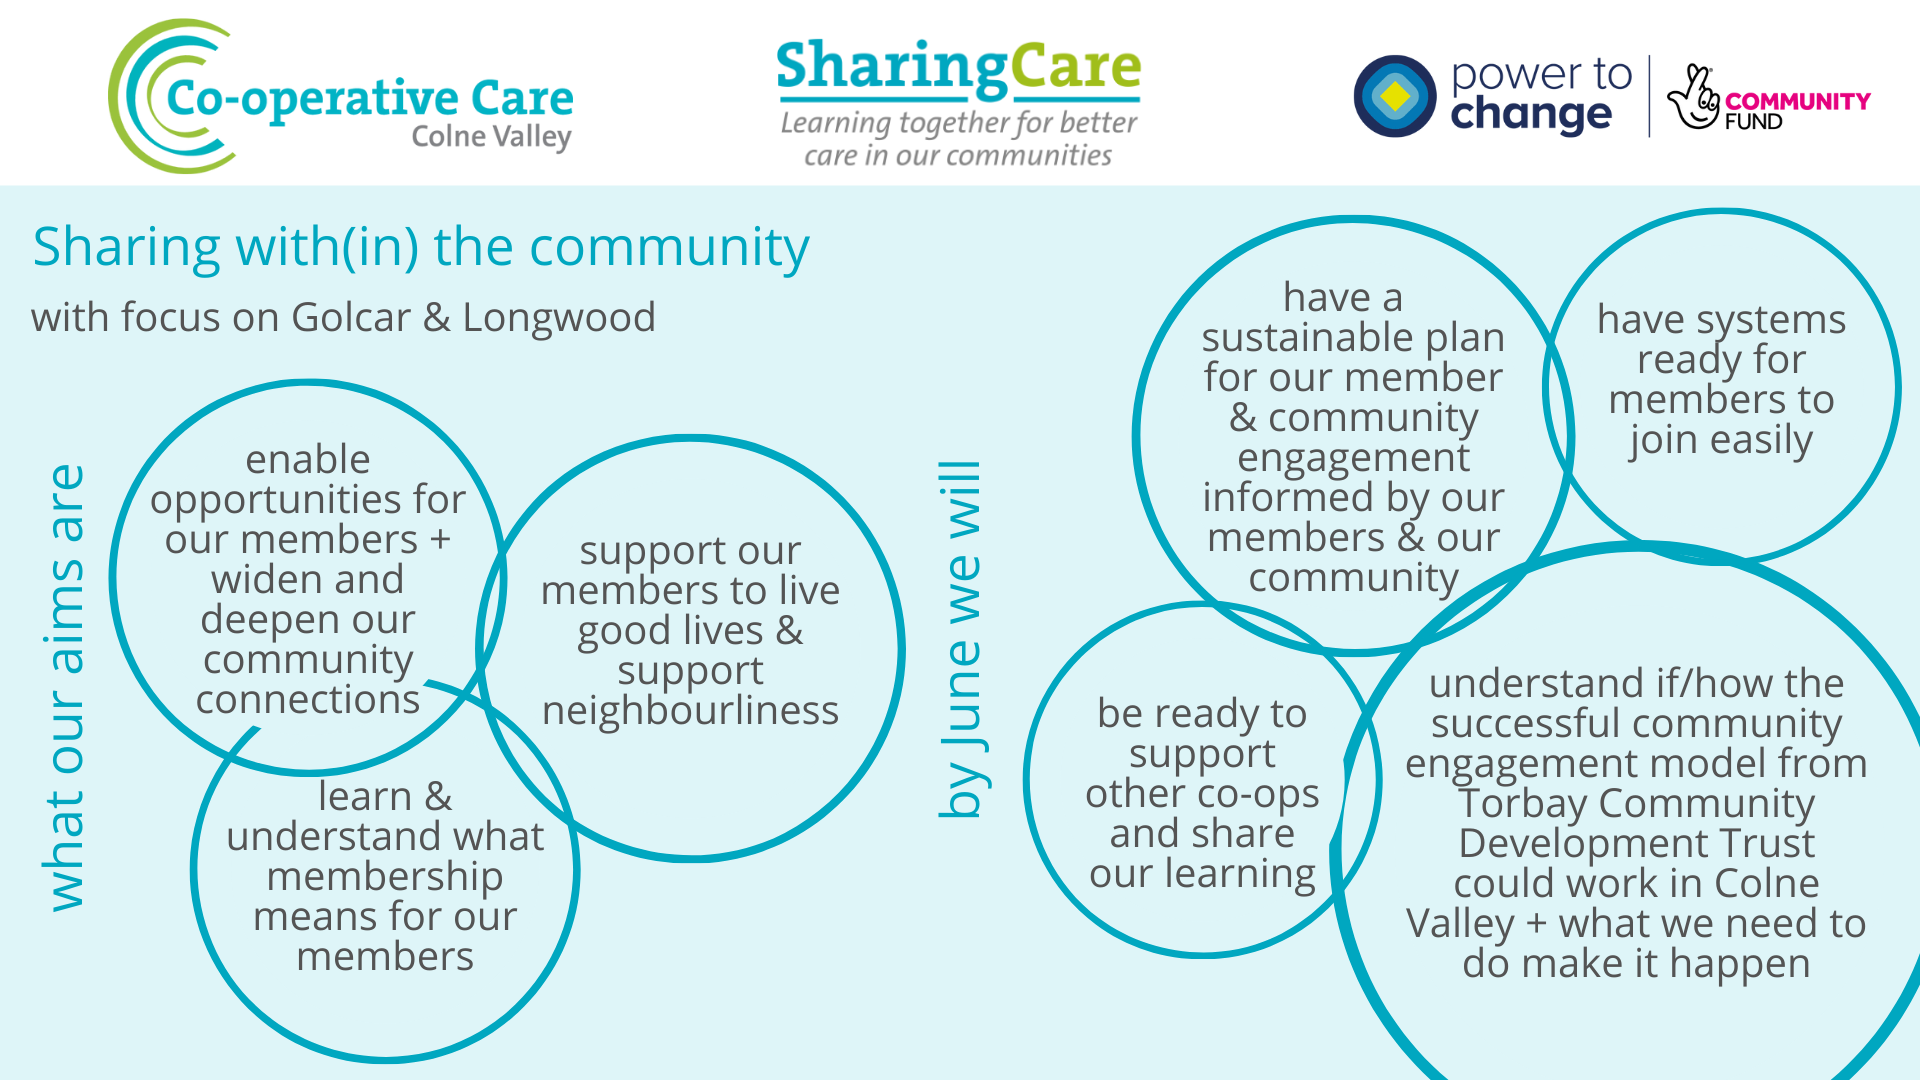 overview of the Sharing Care with(in) the Community